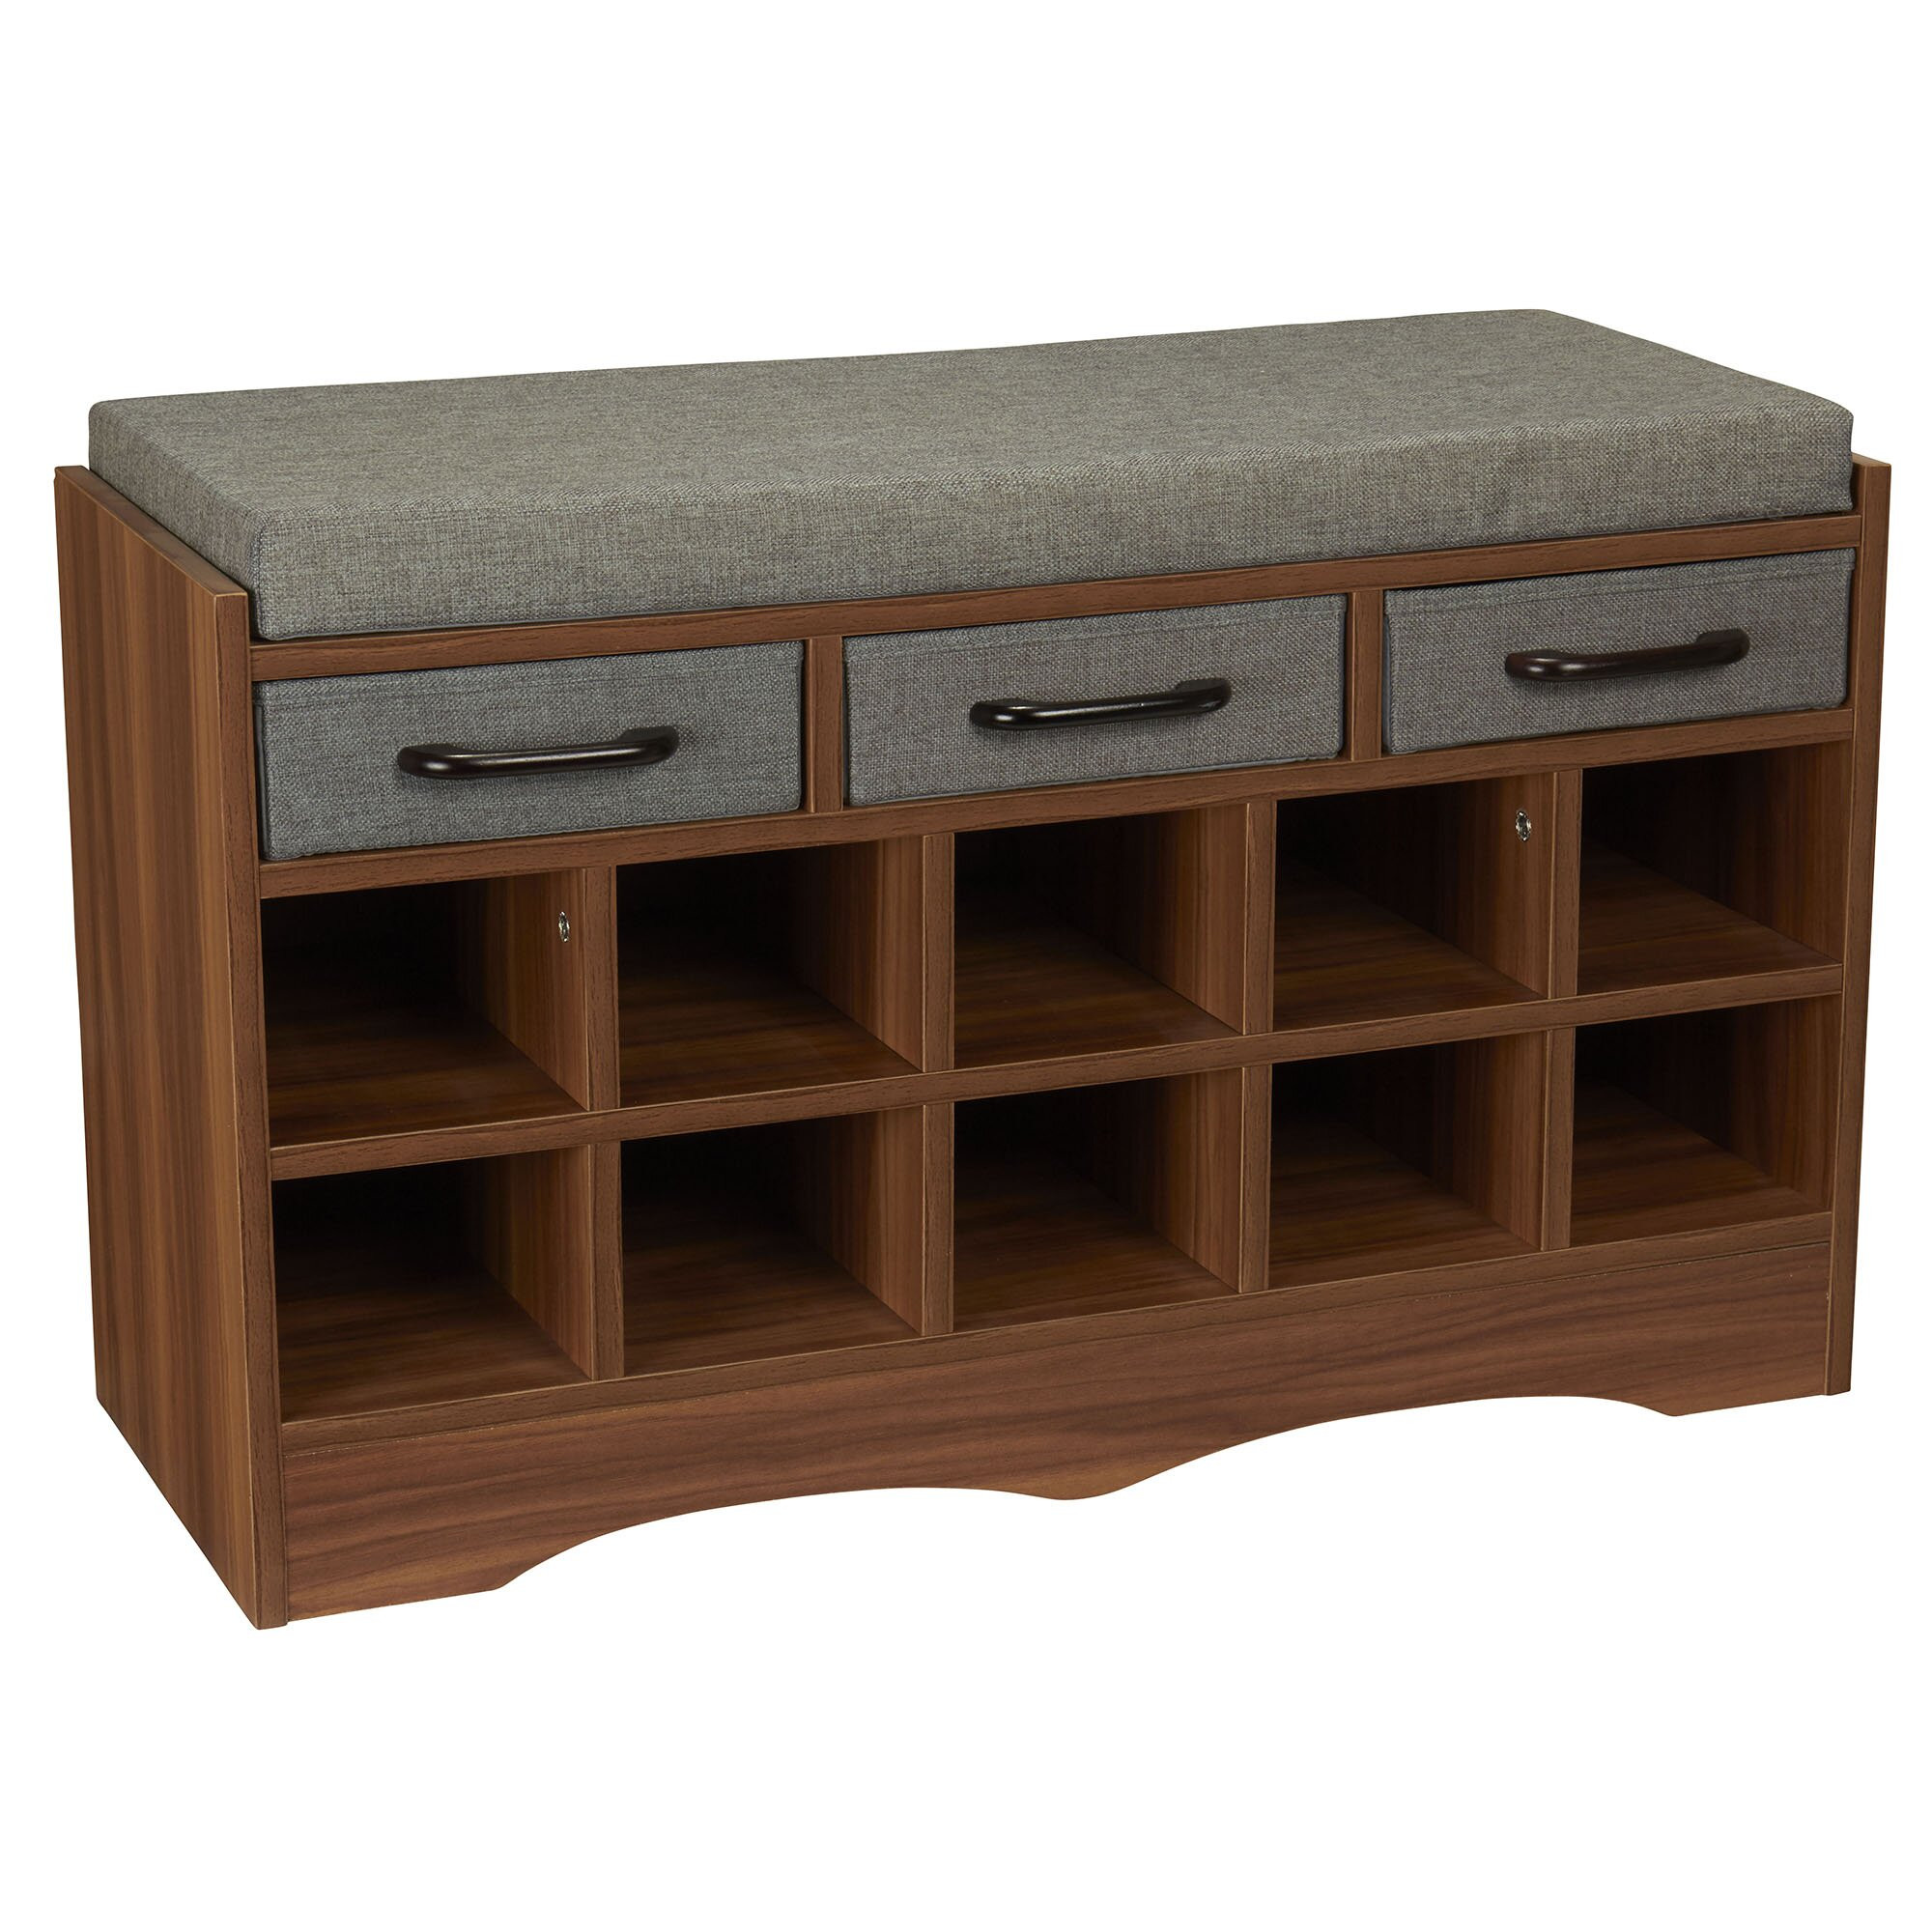 Entry Benches Shoe Storage
 Household Essentials Entryway Shoe Storage Bench & Reviews